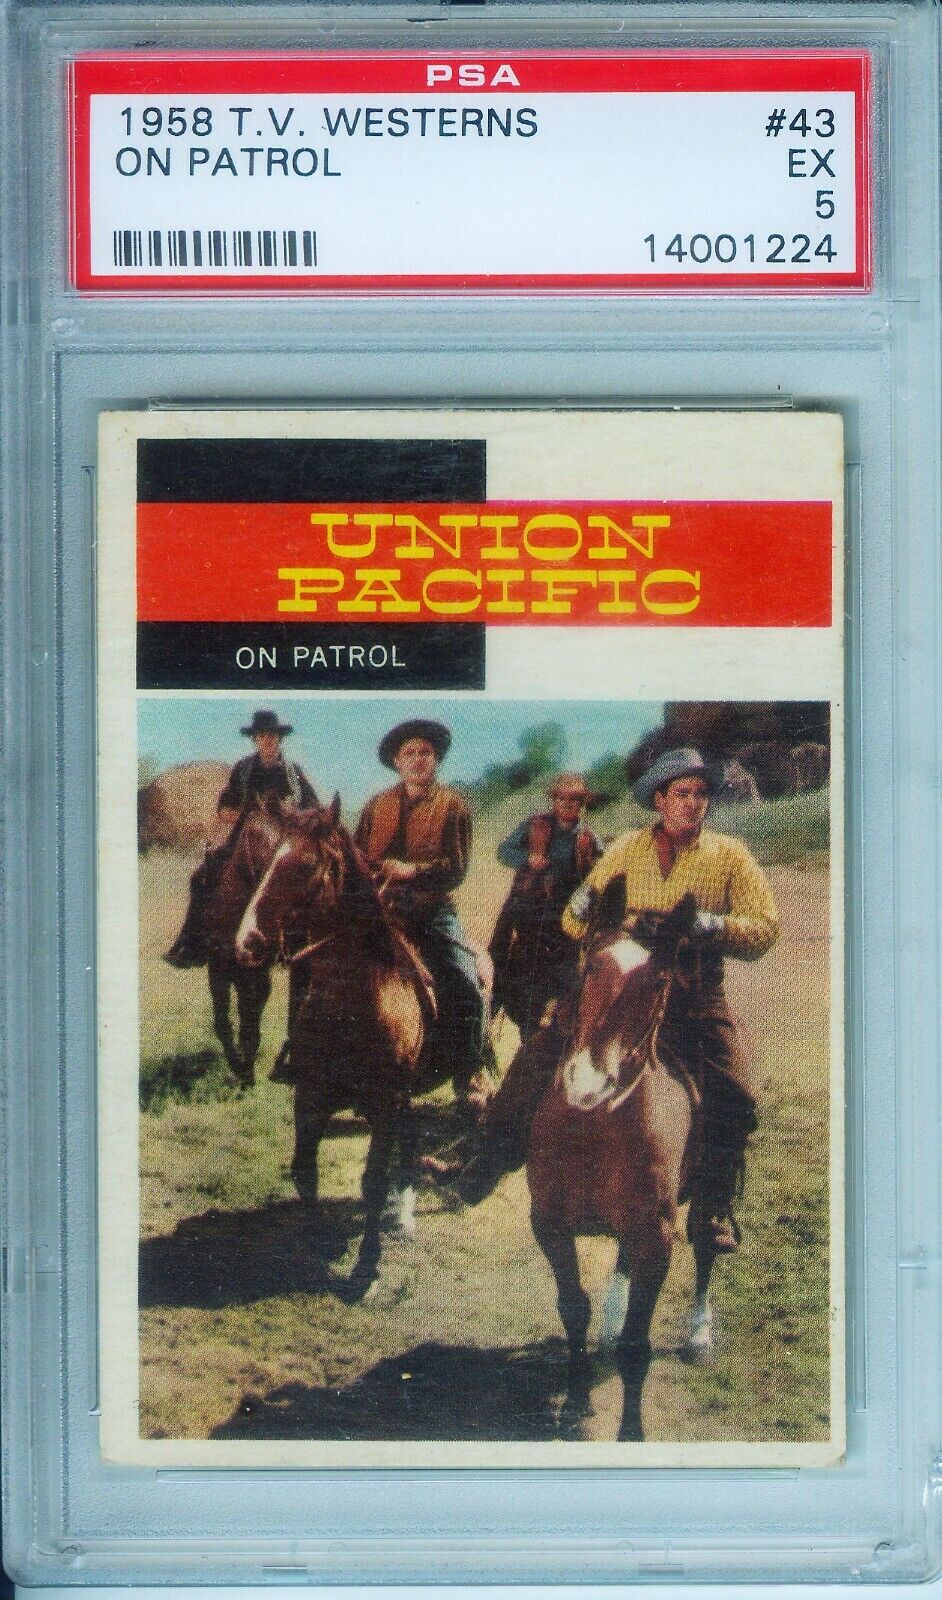 1958 TOPPS T.V. WESTERNS #43 UNION PACIFIC ON PATROL PSA 5 EX